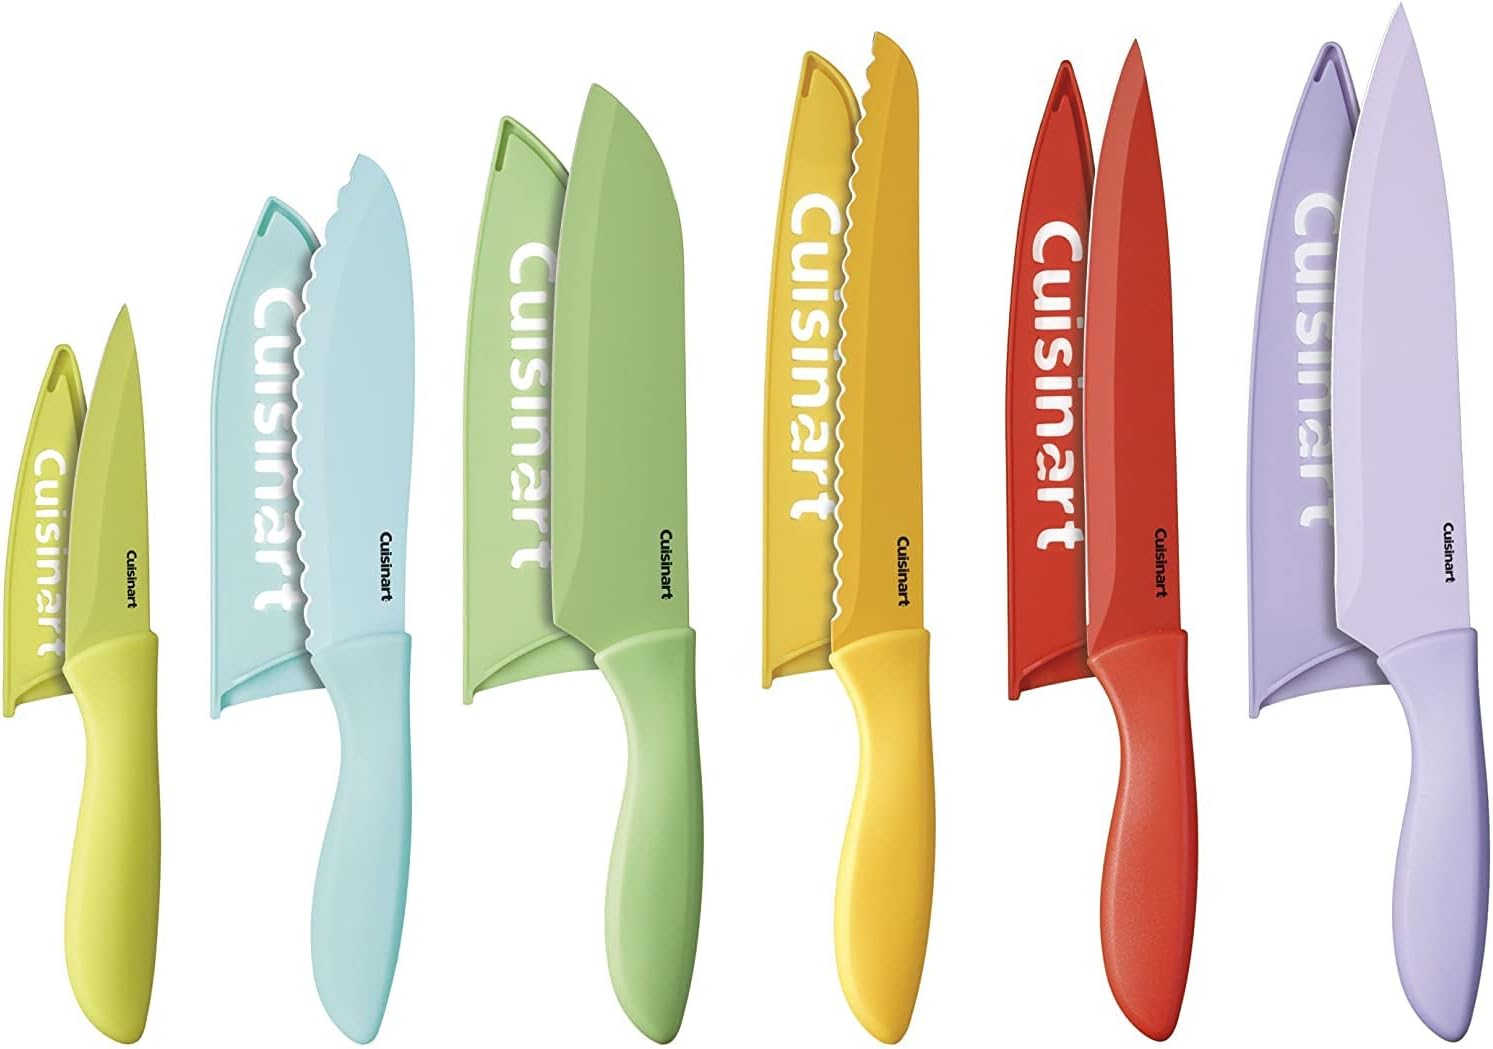 I love the fact that the knives are color-coded for size/type, and come with protective covers. They're dishwasher safe, can be stored anywhere thanks to their covers, and were an excellent price. Most importantly, they're very sharp, and easily cut through bones!